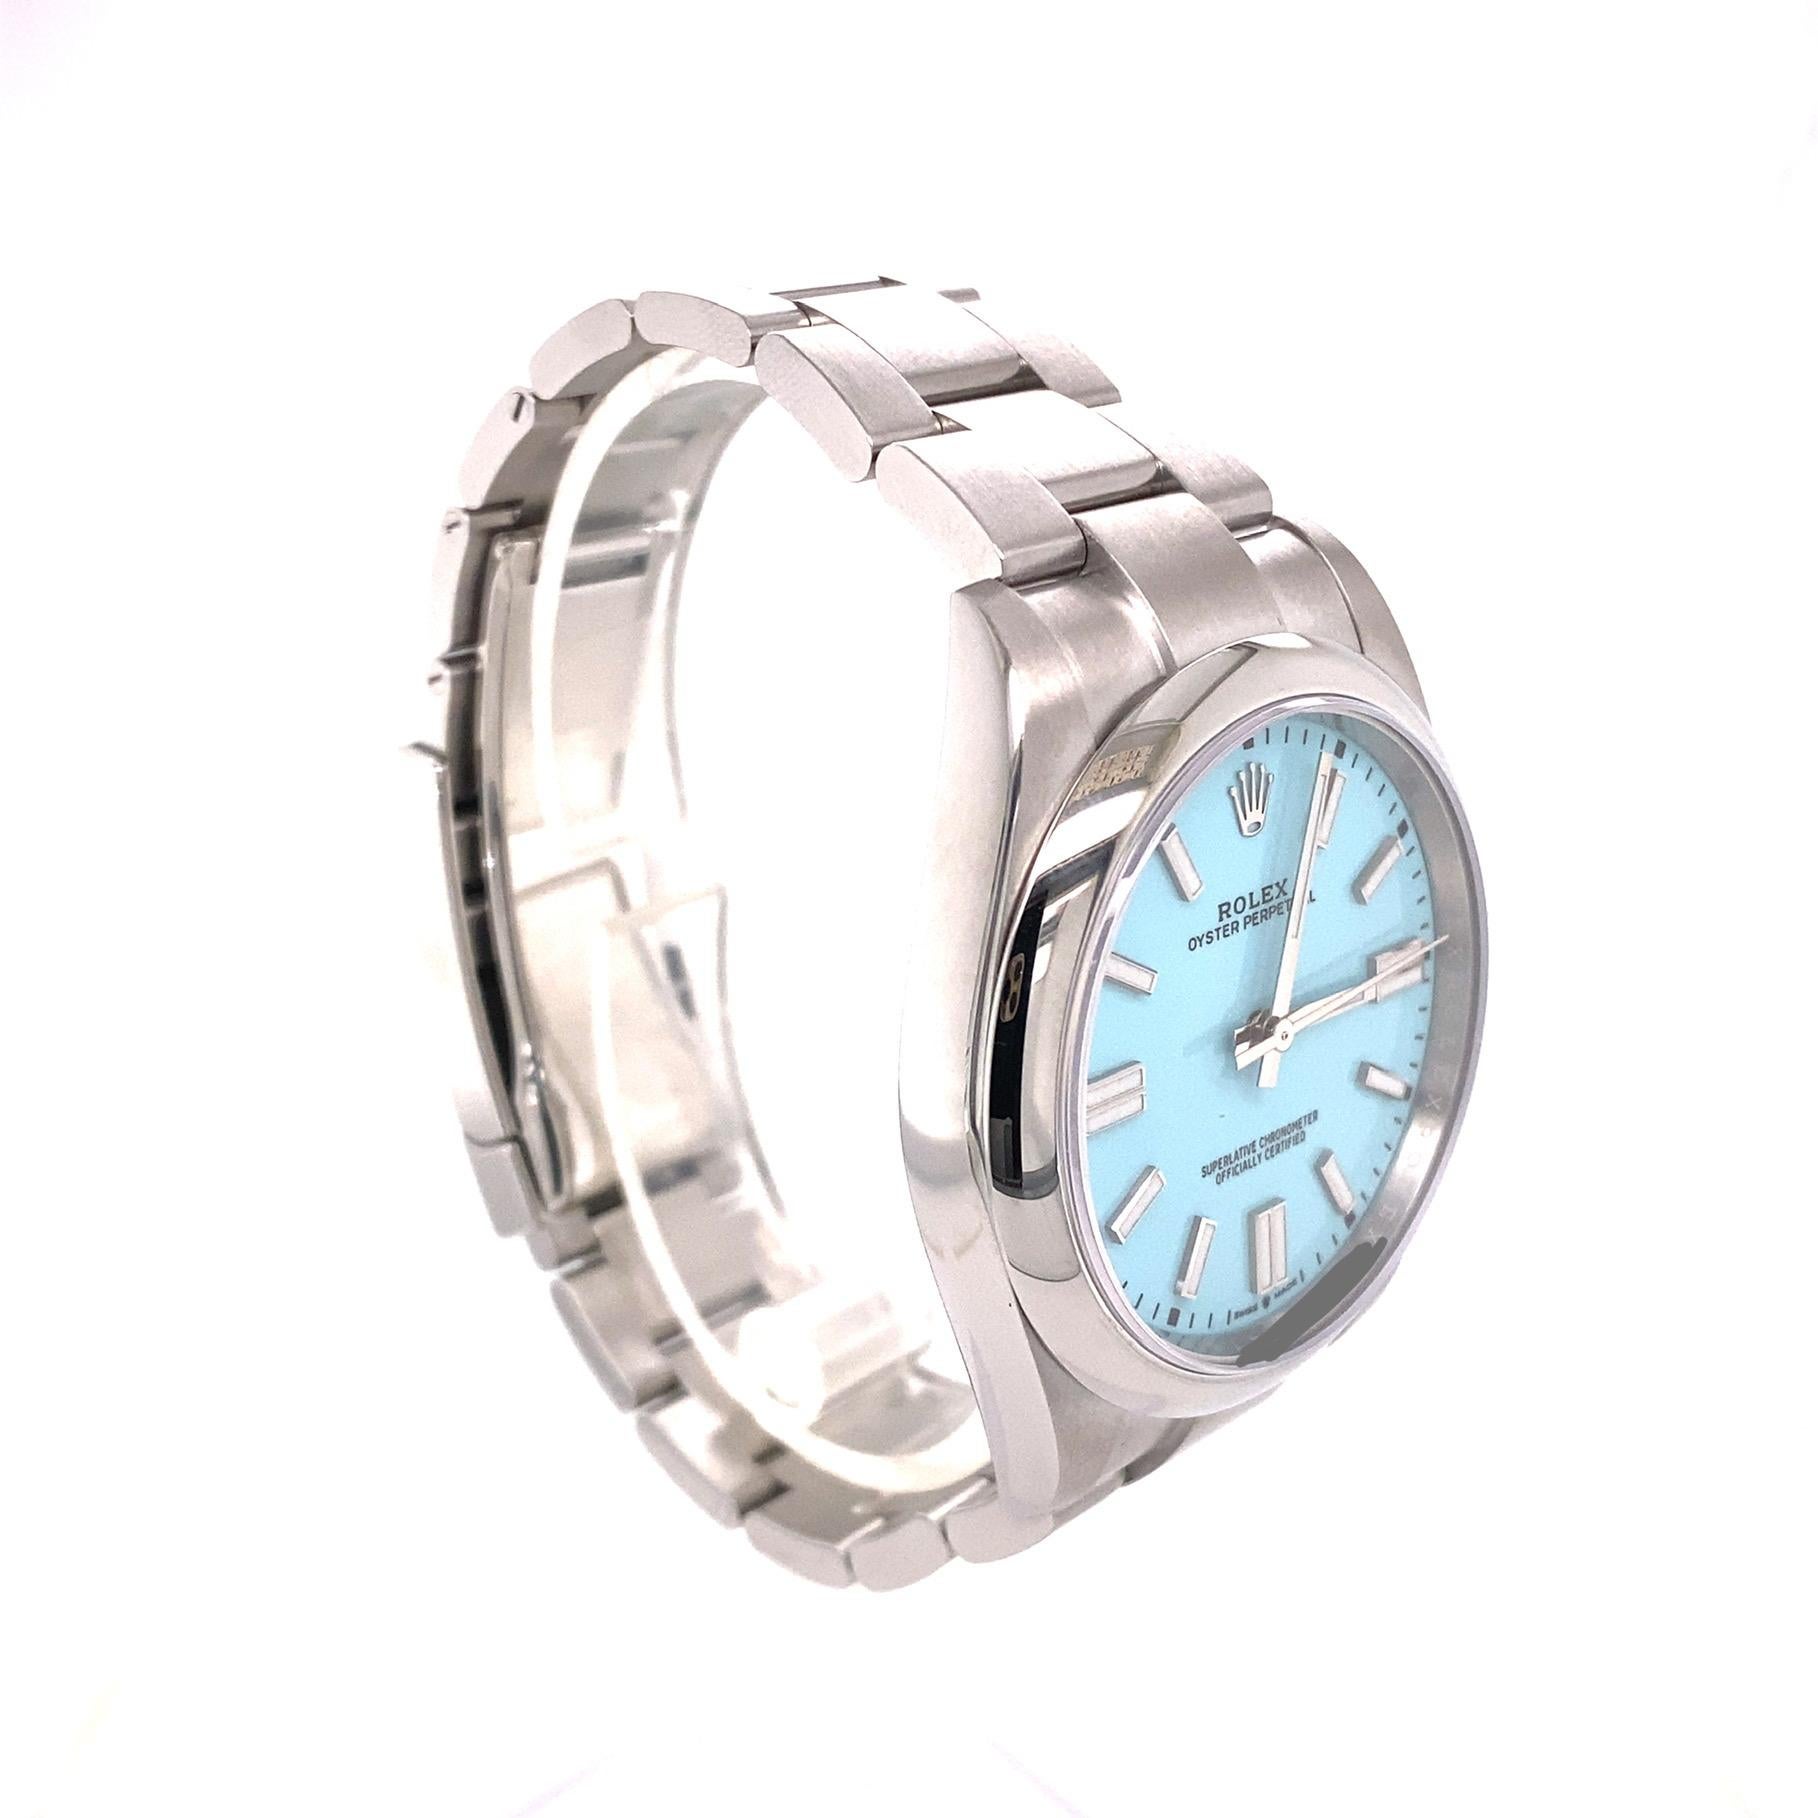 This stainless steel 41mm Oyster Perpetual by Rolex features a turquoise blue dial with smooth bezel.  It is an oyster bracelet with fold clasp, sapphire crystal face, 3230 movement, and a screw down crown.  It is water resistant up to 100 meters. 